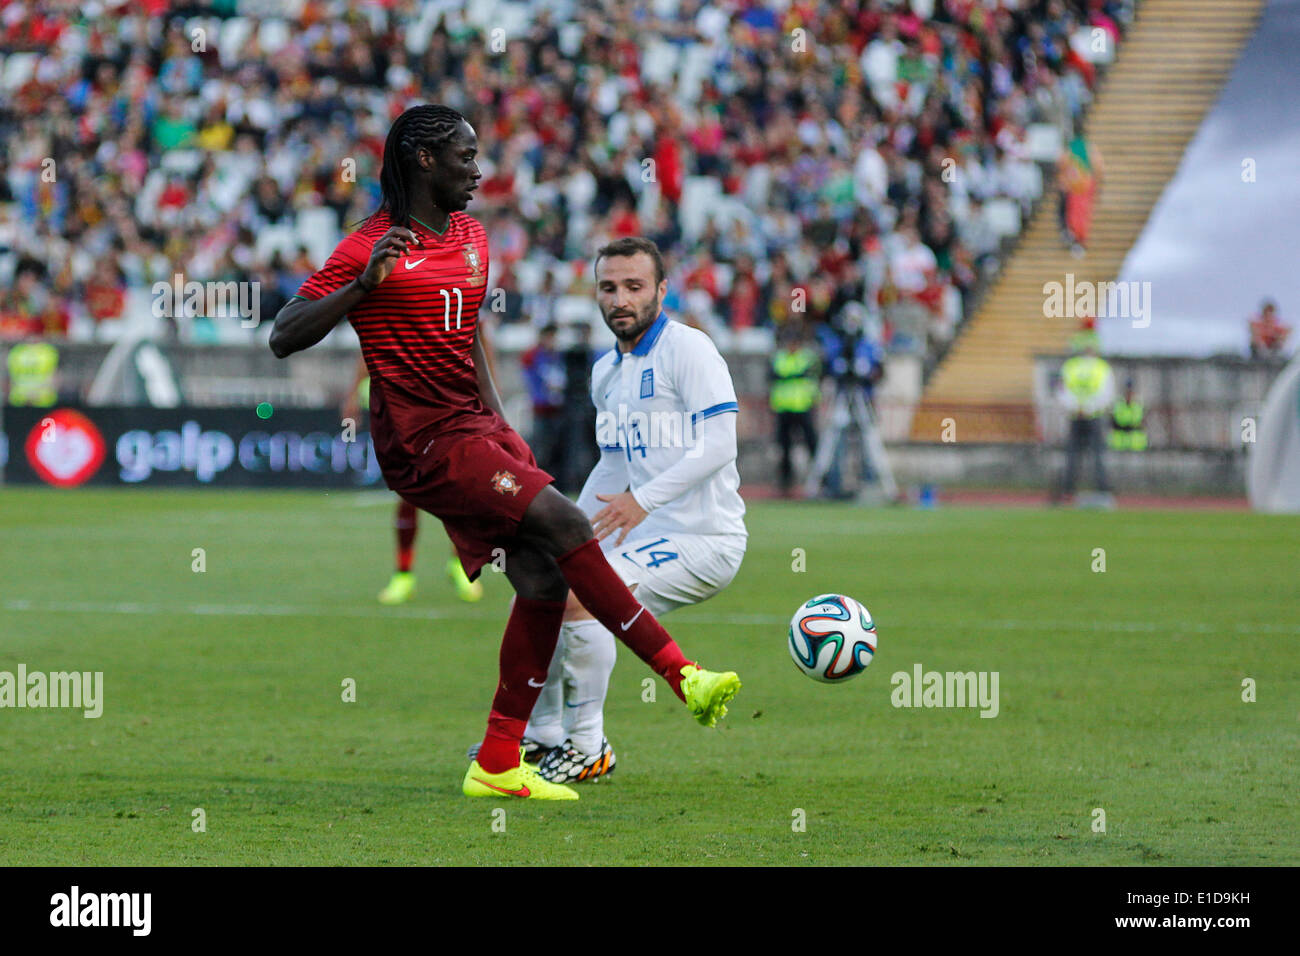 Lisbon, Porrtugal. 31st May, 2014. Portugal forward Eder (11) in action followed by Greece forward Dimitris Salpingidis (14) during preparatory friendly match for the World Cup at the National Stadium in Lisbon, Portugal, Saturday, May 31, 2014. Credit:  Leonardo Mota/Alamy Live News Stock Photo